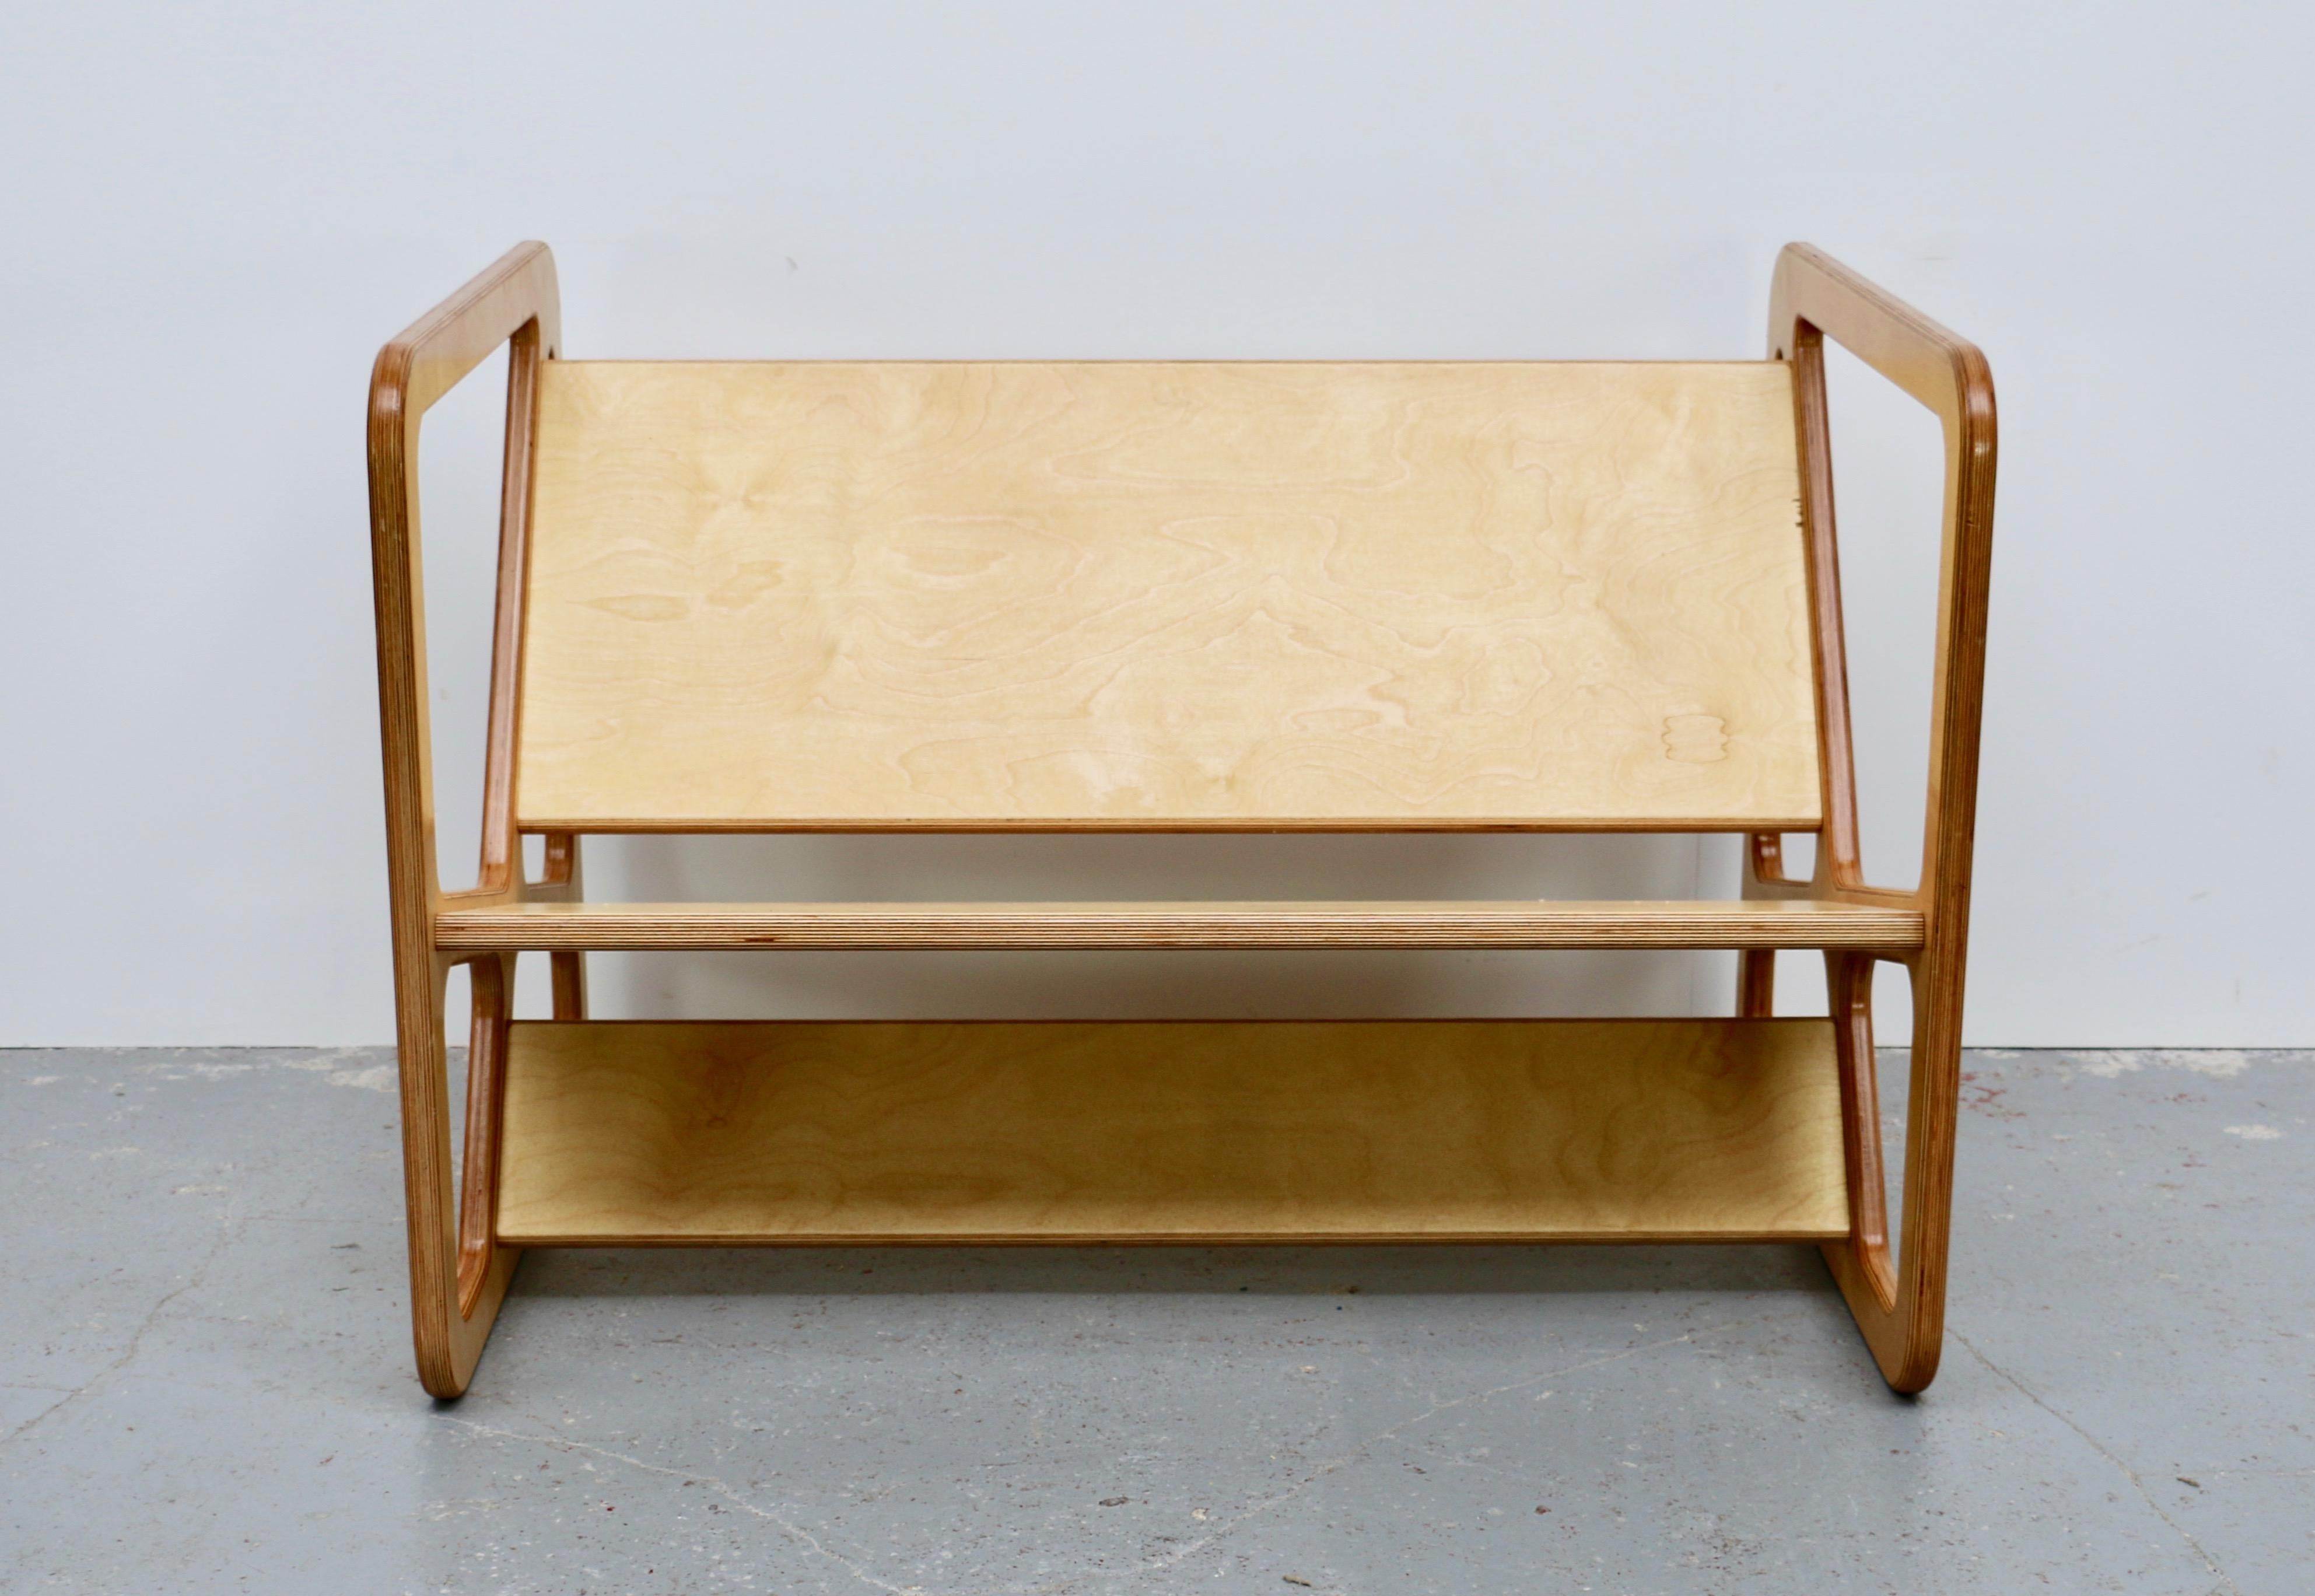 This bench has a very special design, it's beautiful on each side and very confortable.